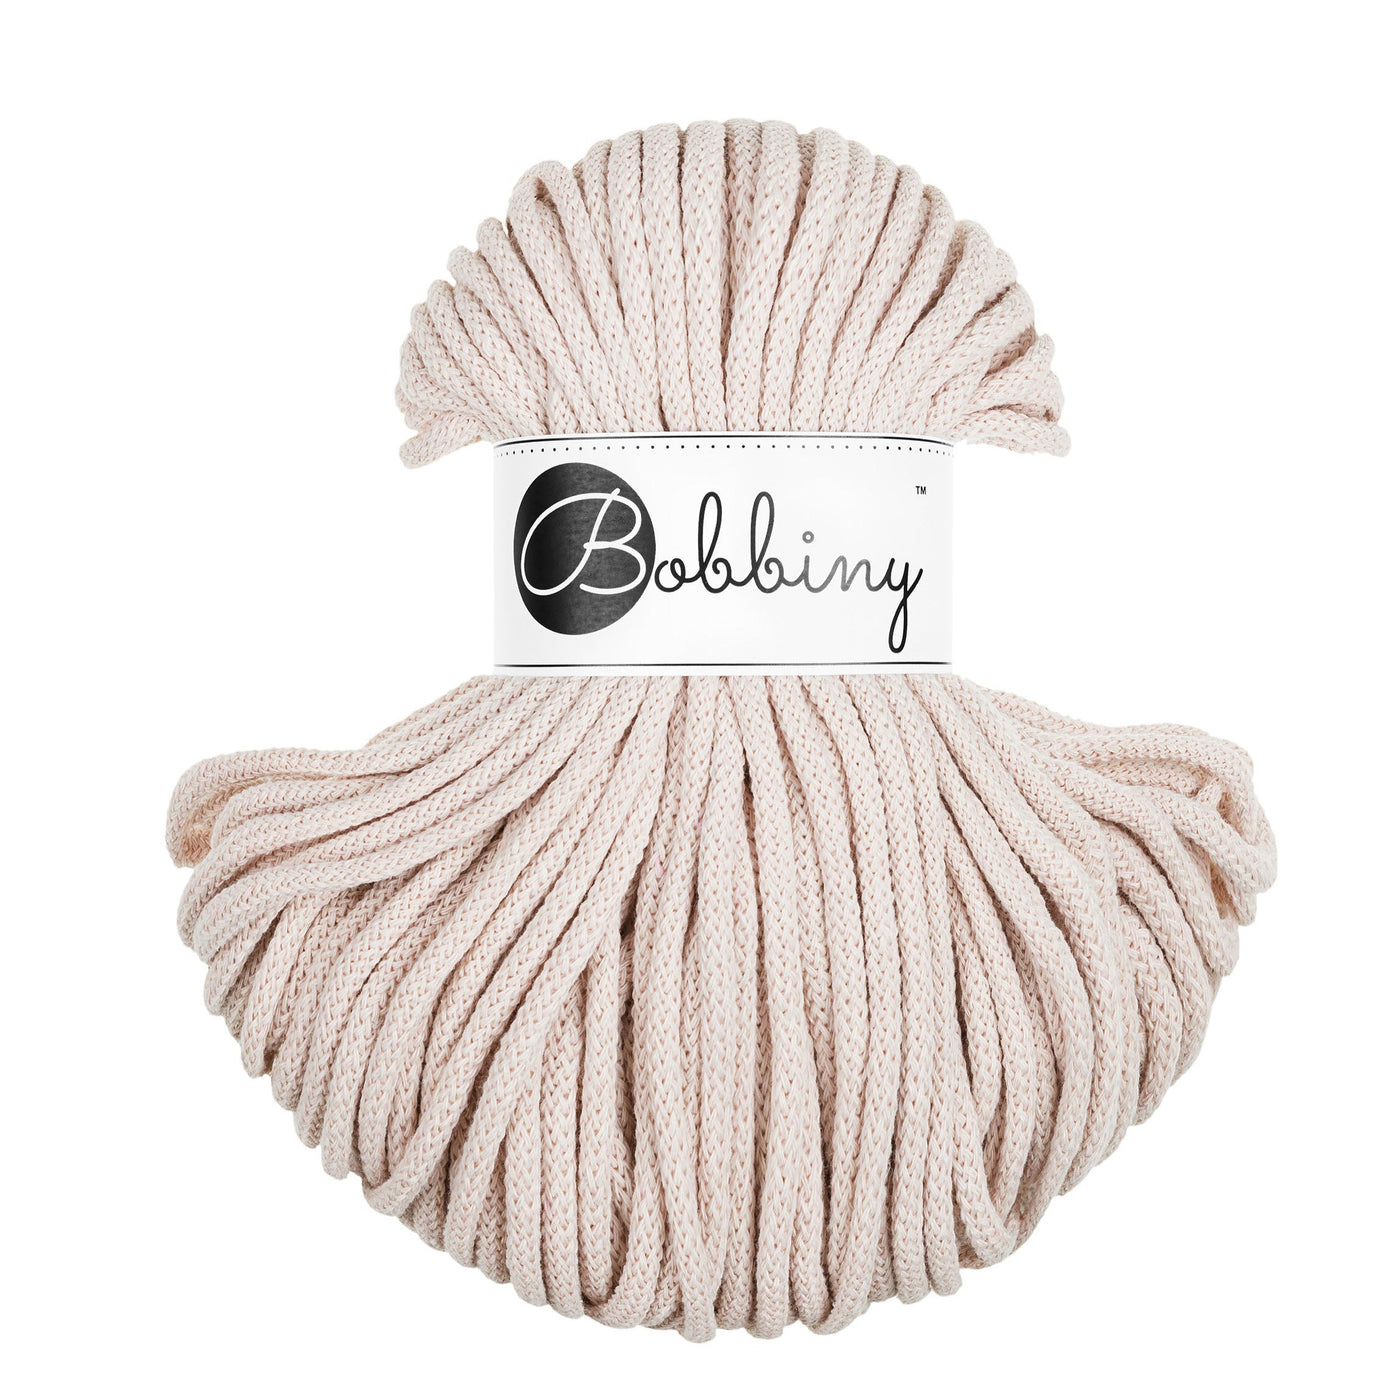 Bobbiny braided cord 5mm 50m in nude shade